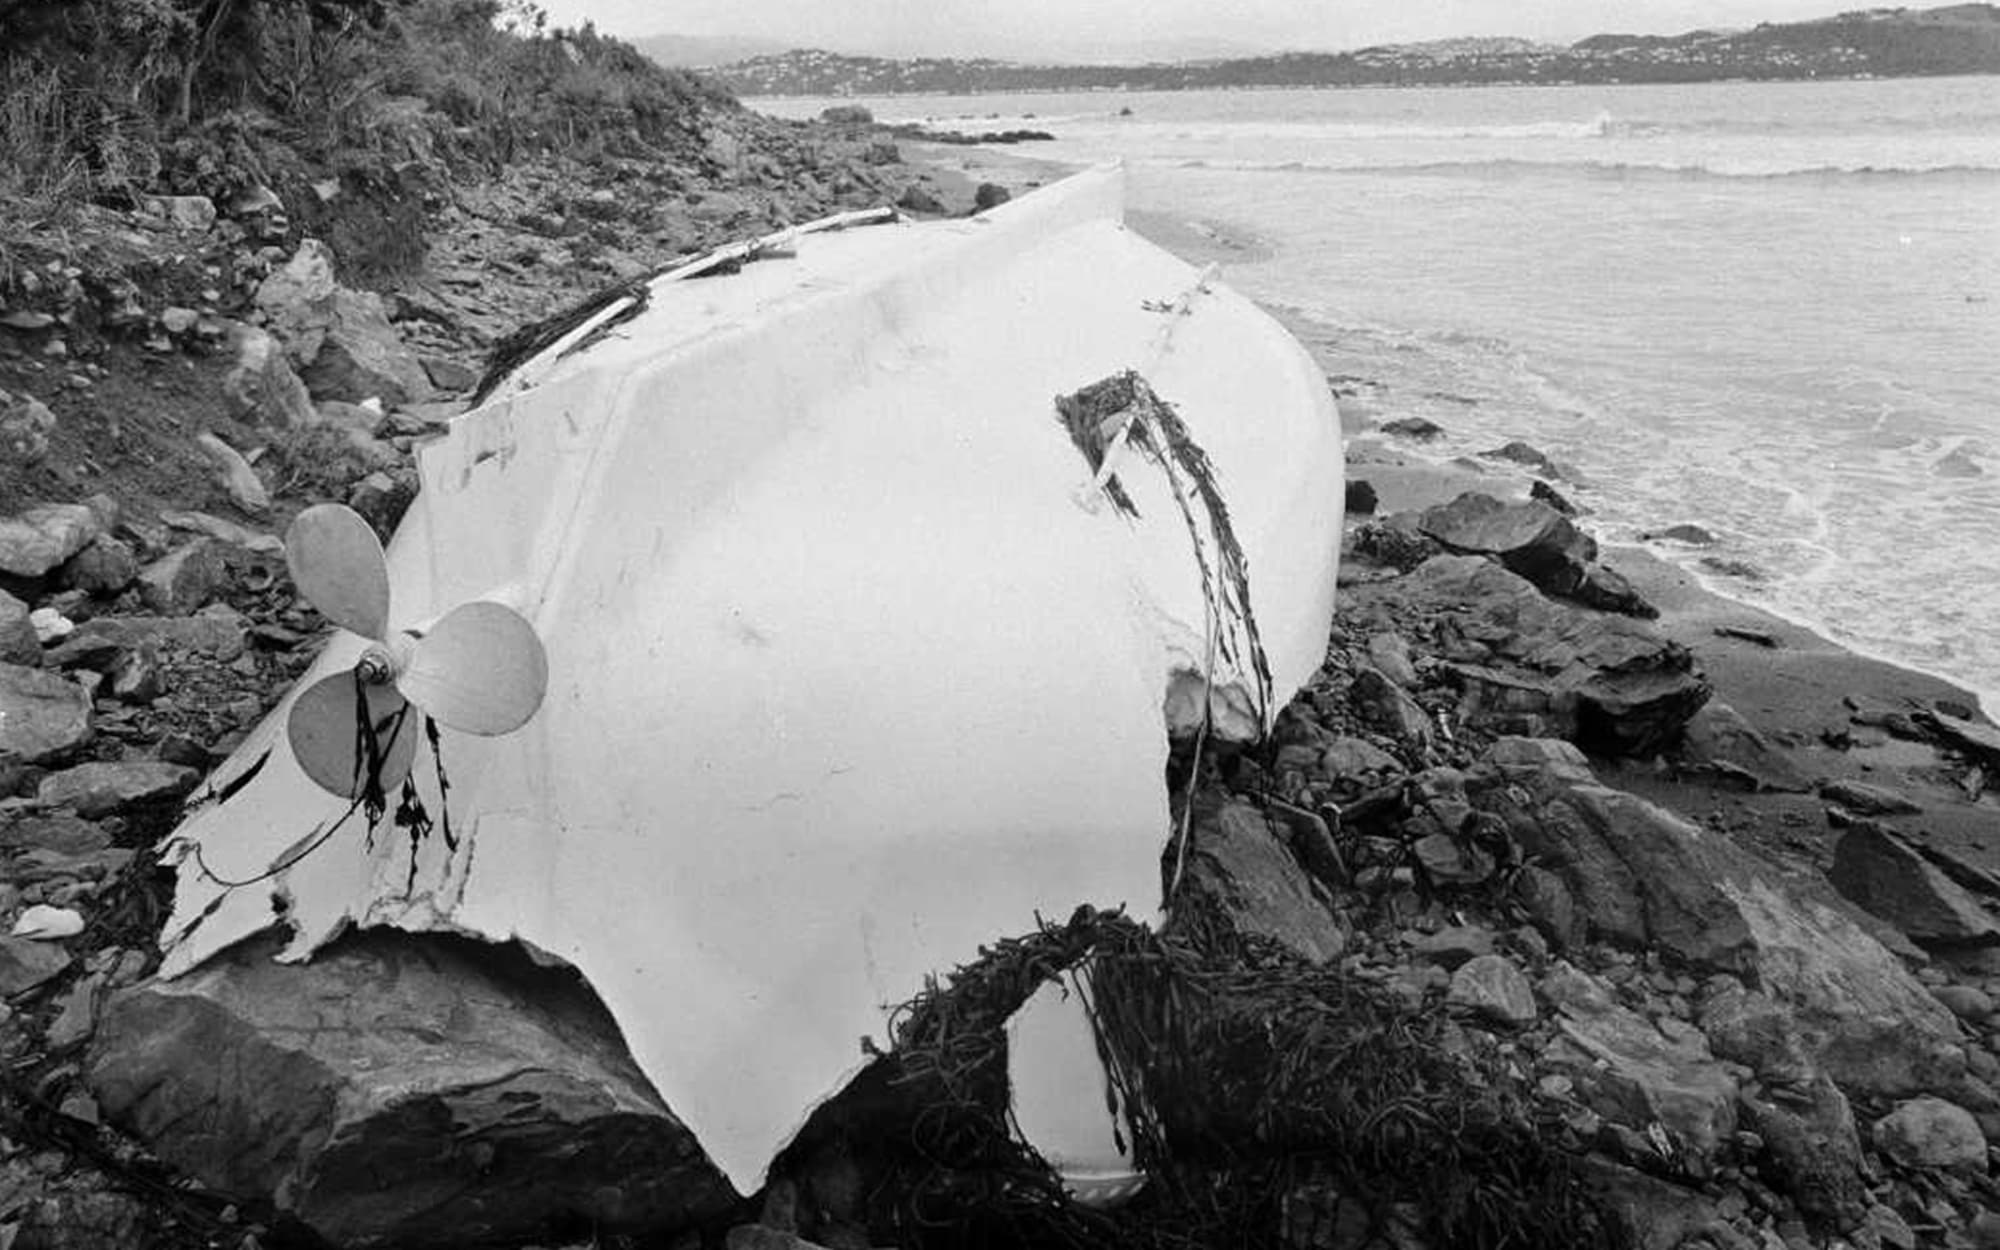 Beached lifeboat from the Wahine, Eastbourne, taken 11 April 1968 by an unidentified Evening Post staff photographer. Shows the lifeboat lying upside-down, with pieces of seaweed on and around it.